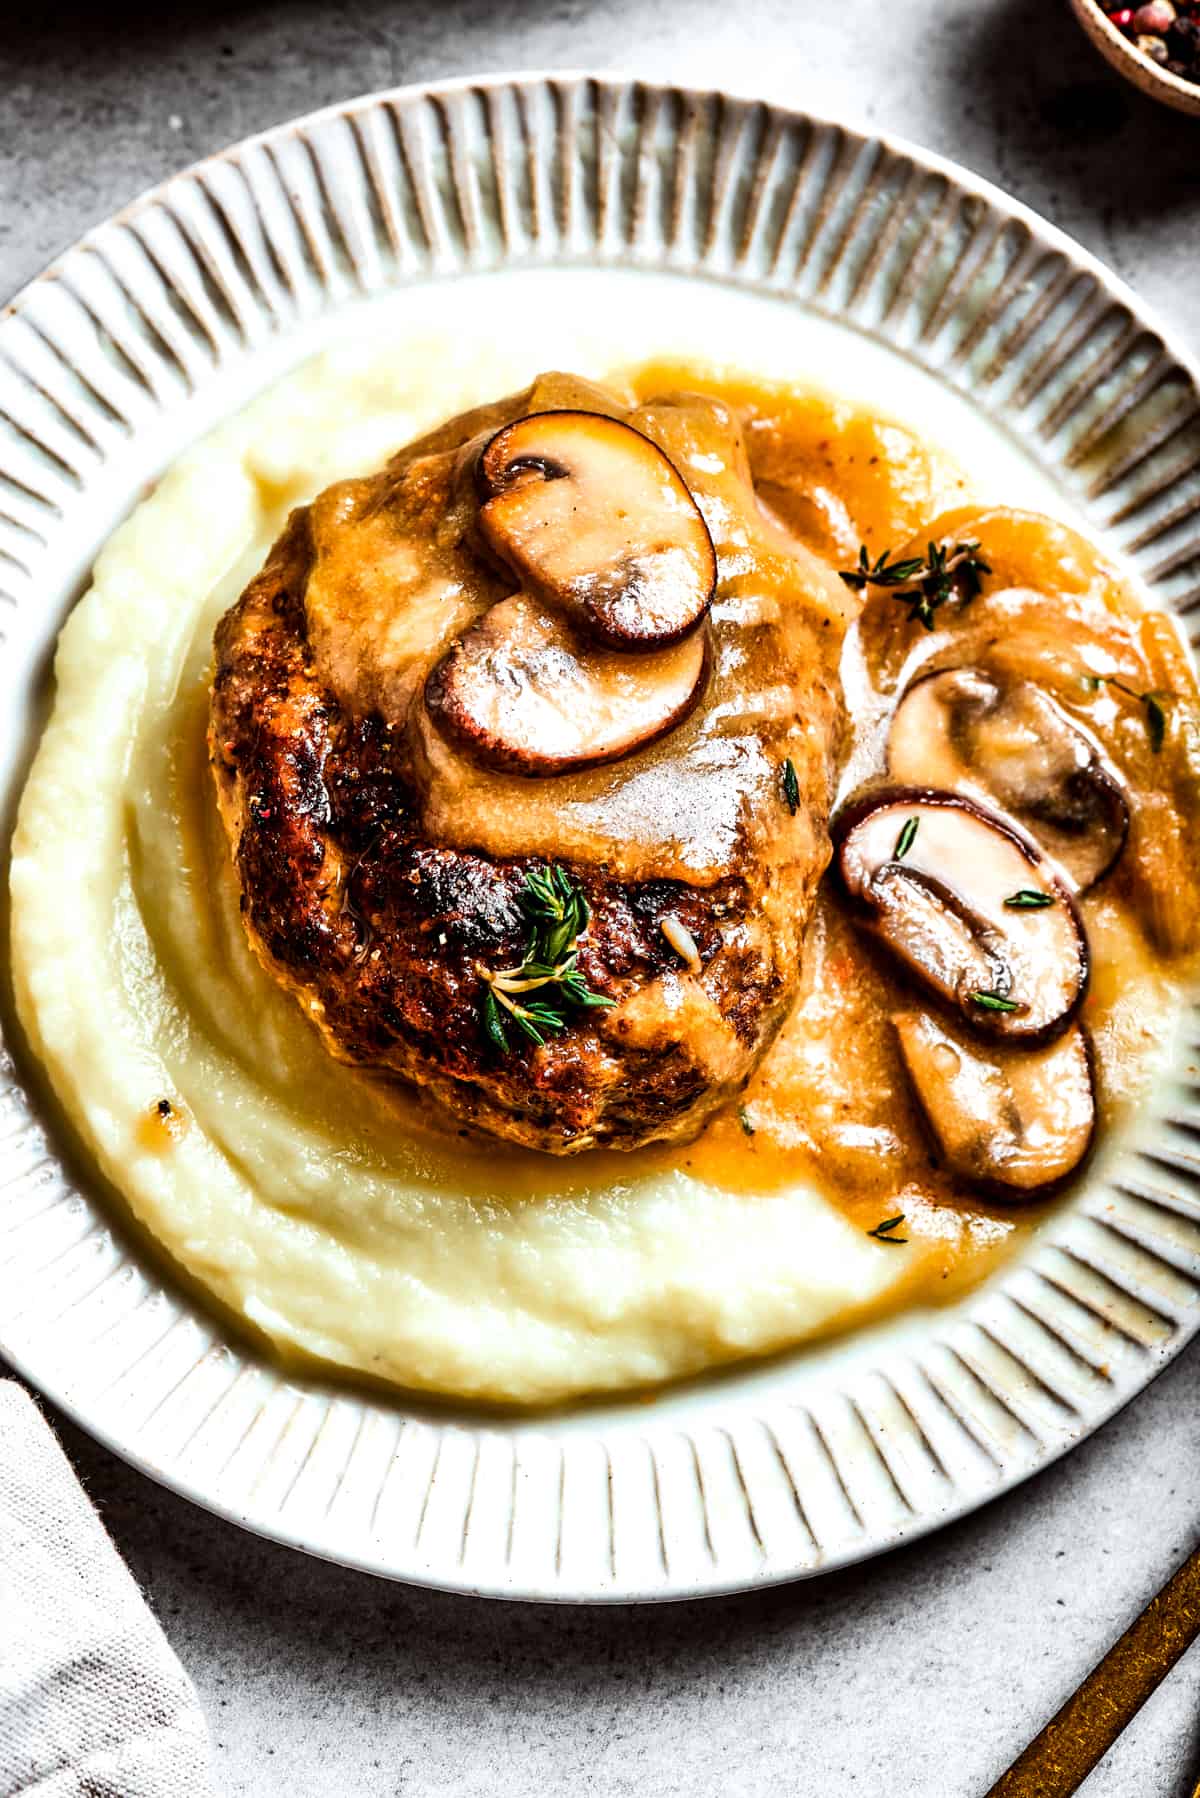 A serving of chopped steak served over mashed potatoes.